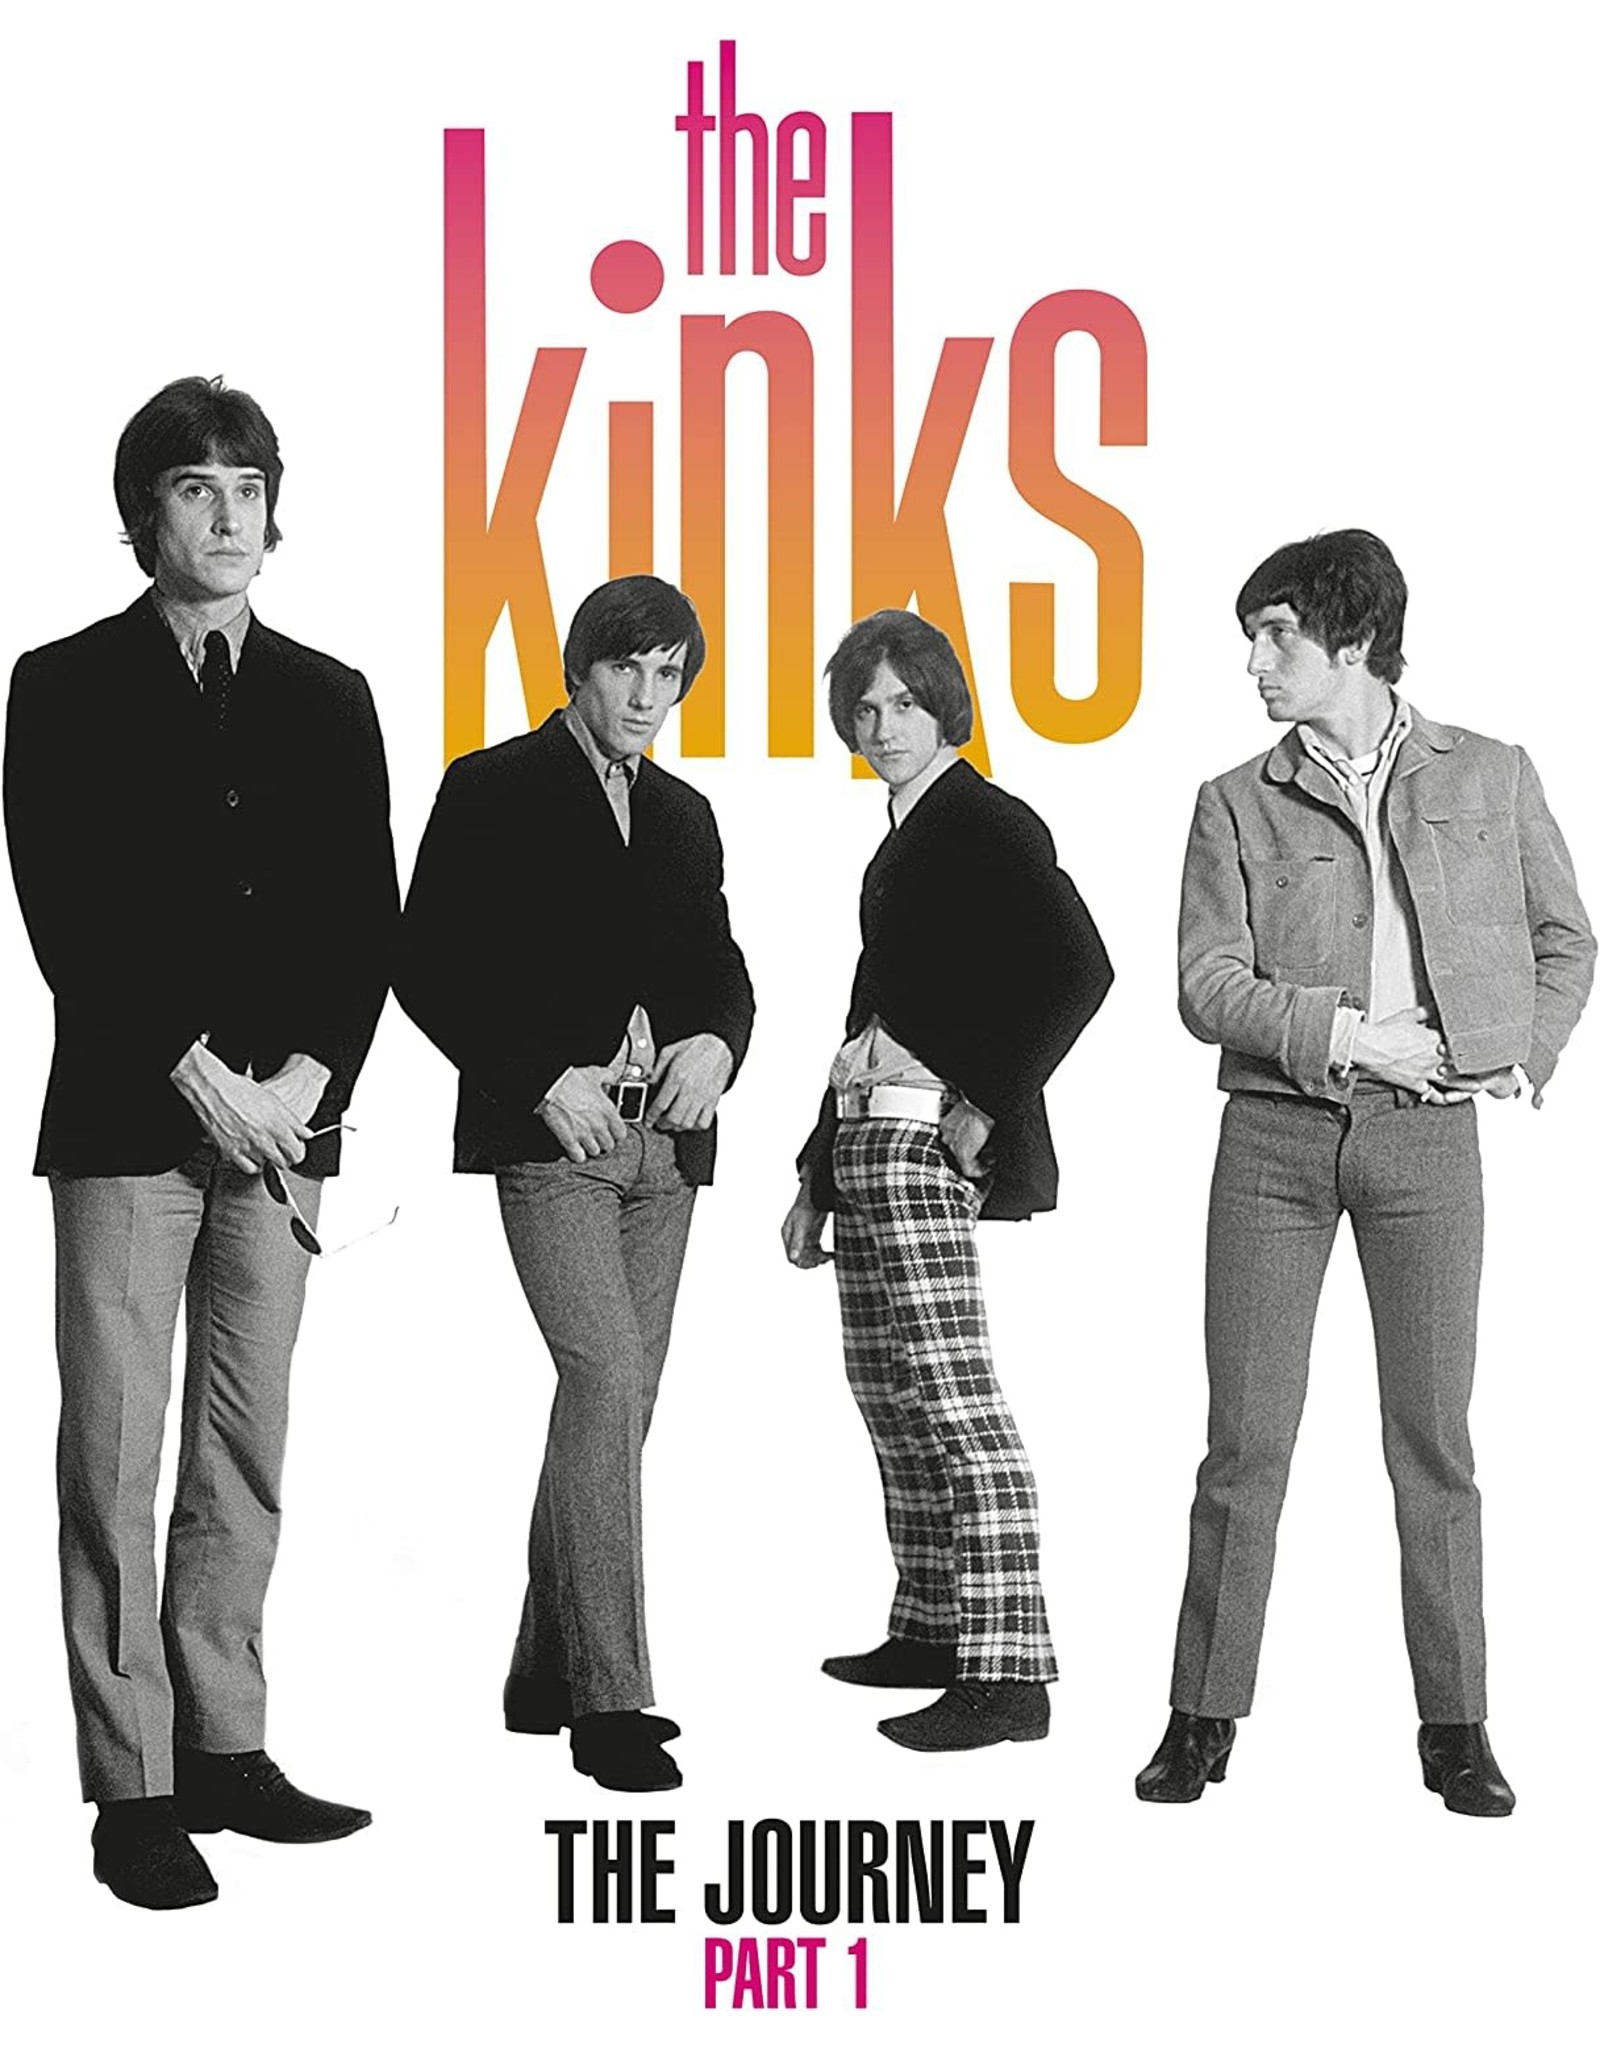 Kinks, The - The Journey Part 1 2CD